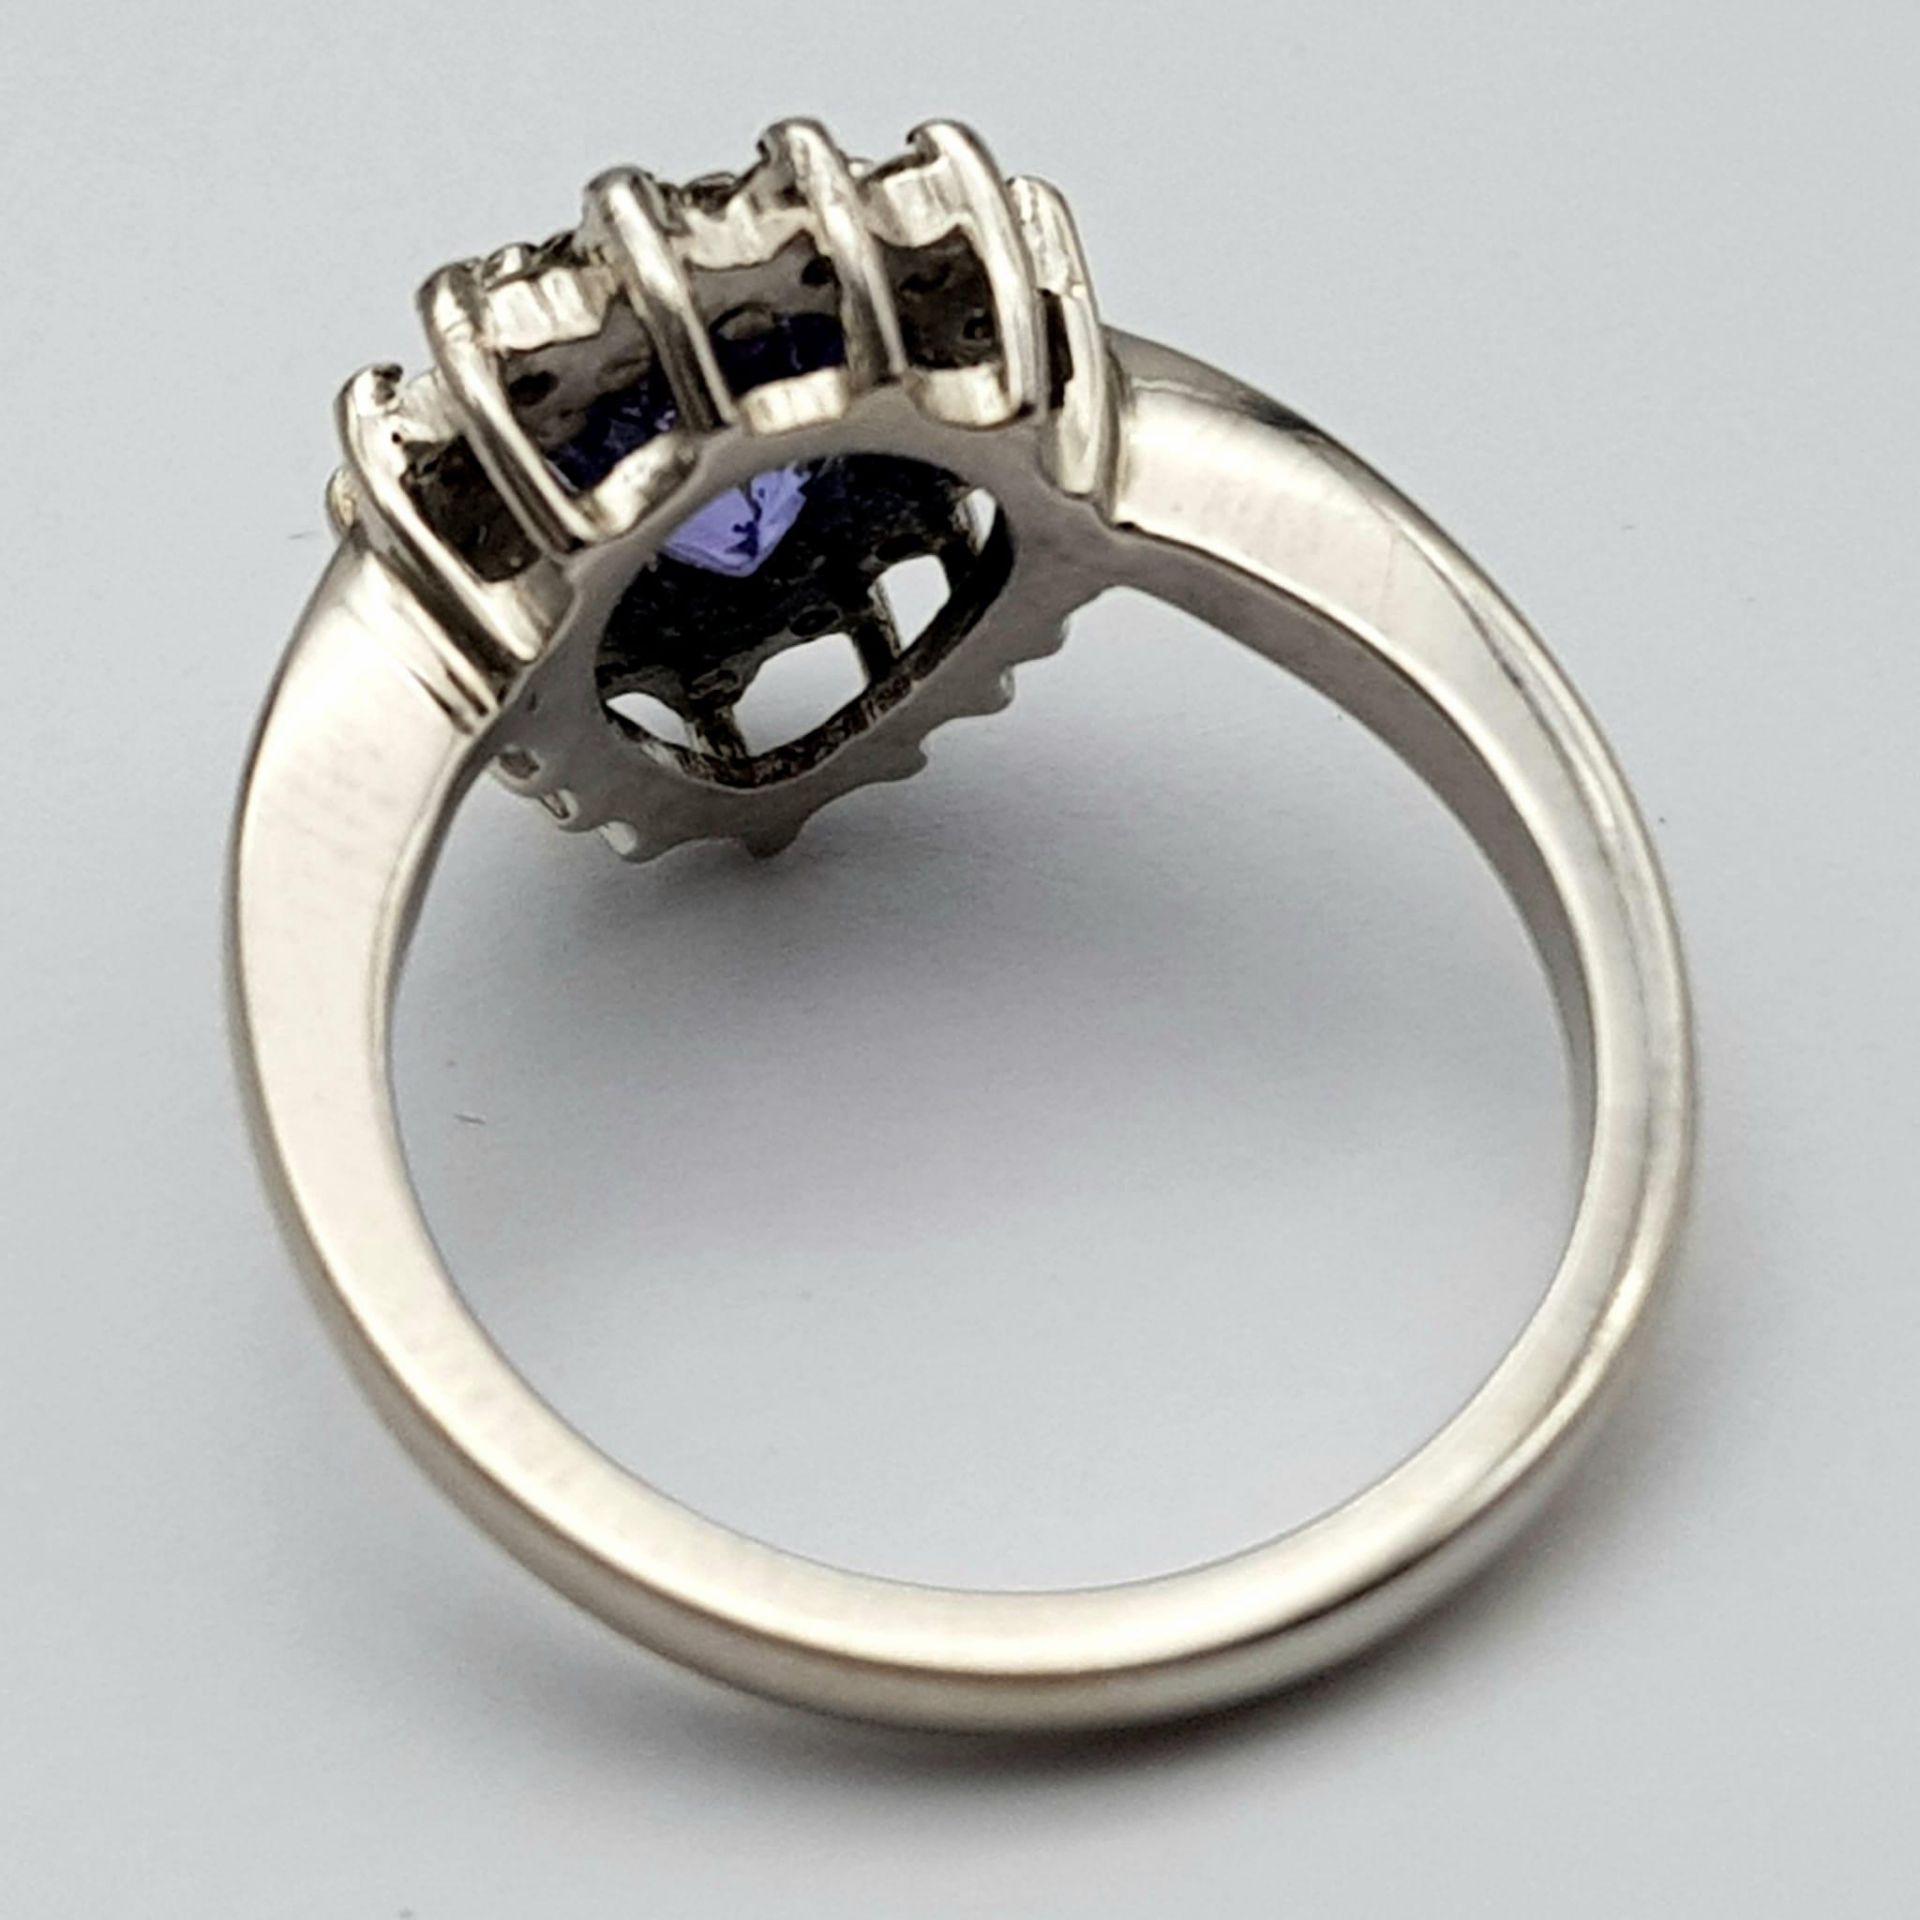 An 18 K white gold ring with a pear cut tanzanite (1.71 carats) surrounded by a halo of diamonds, - Image 6 of 12